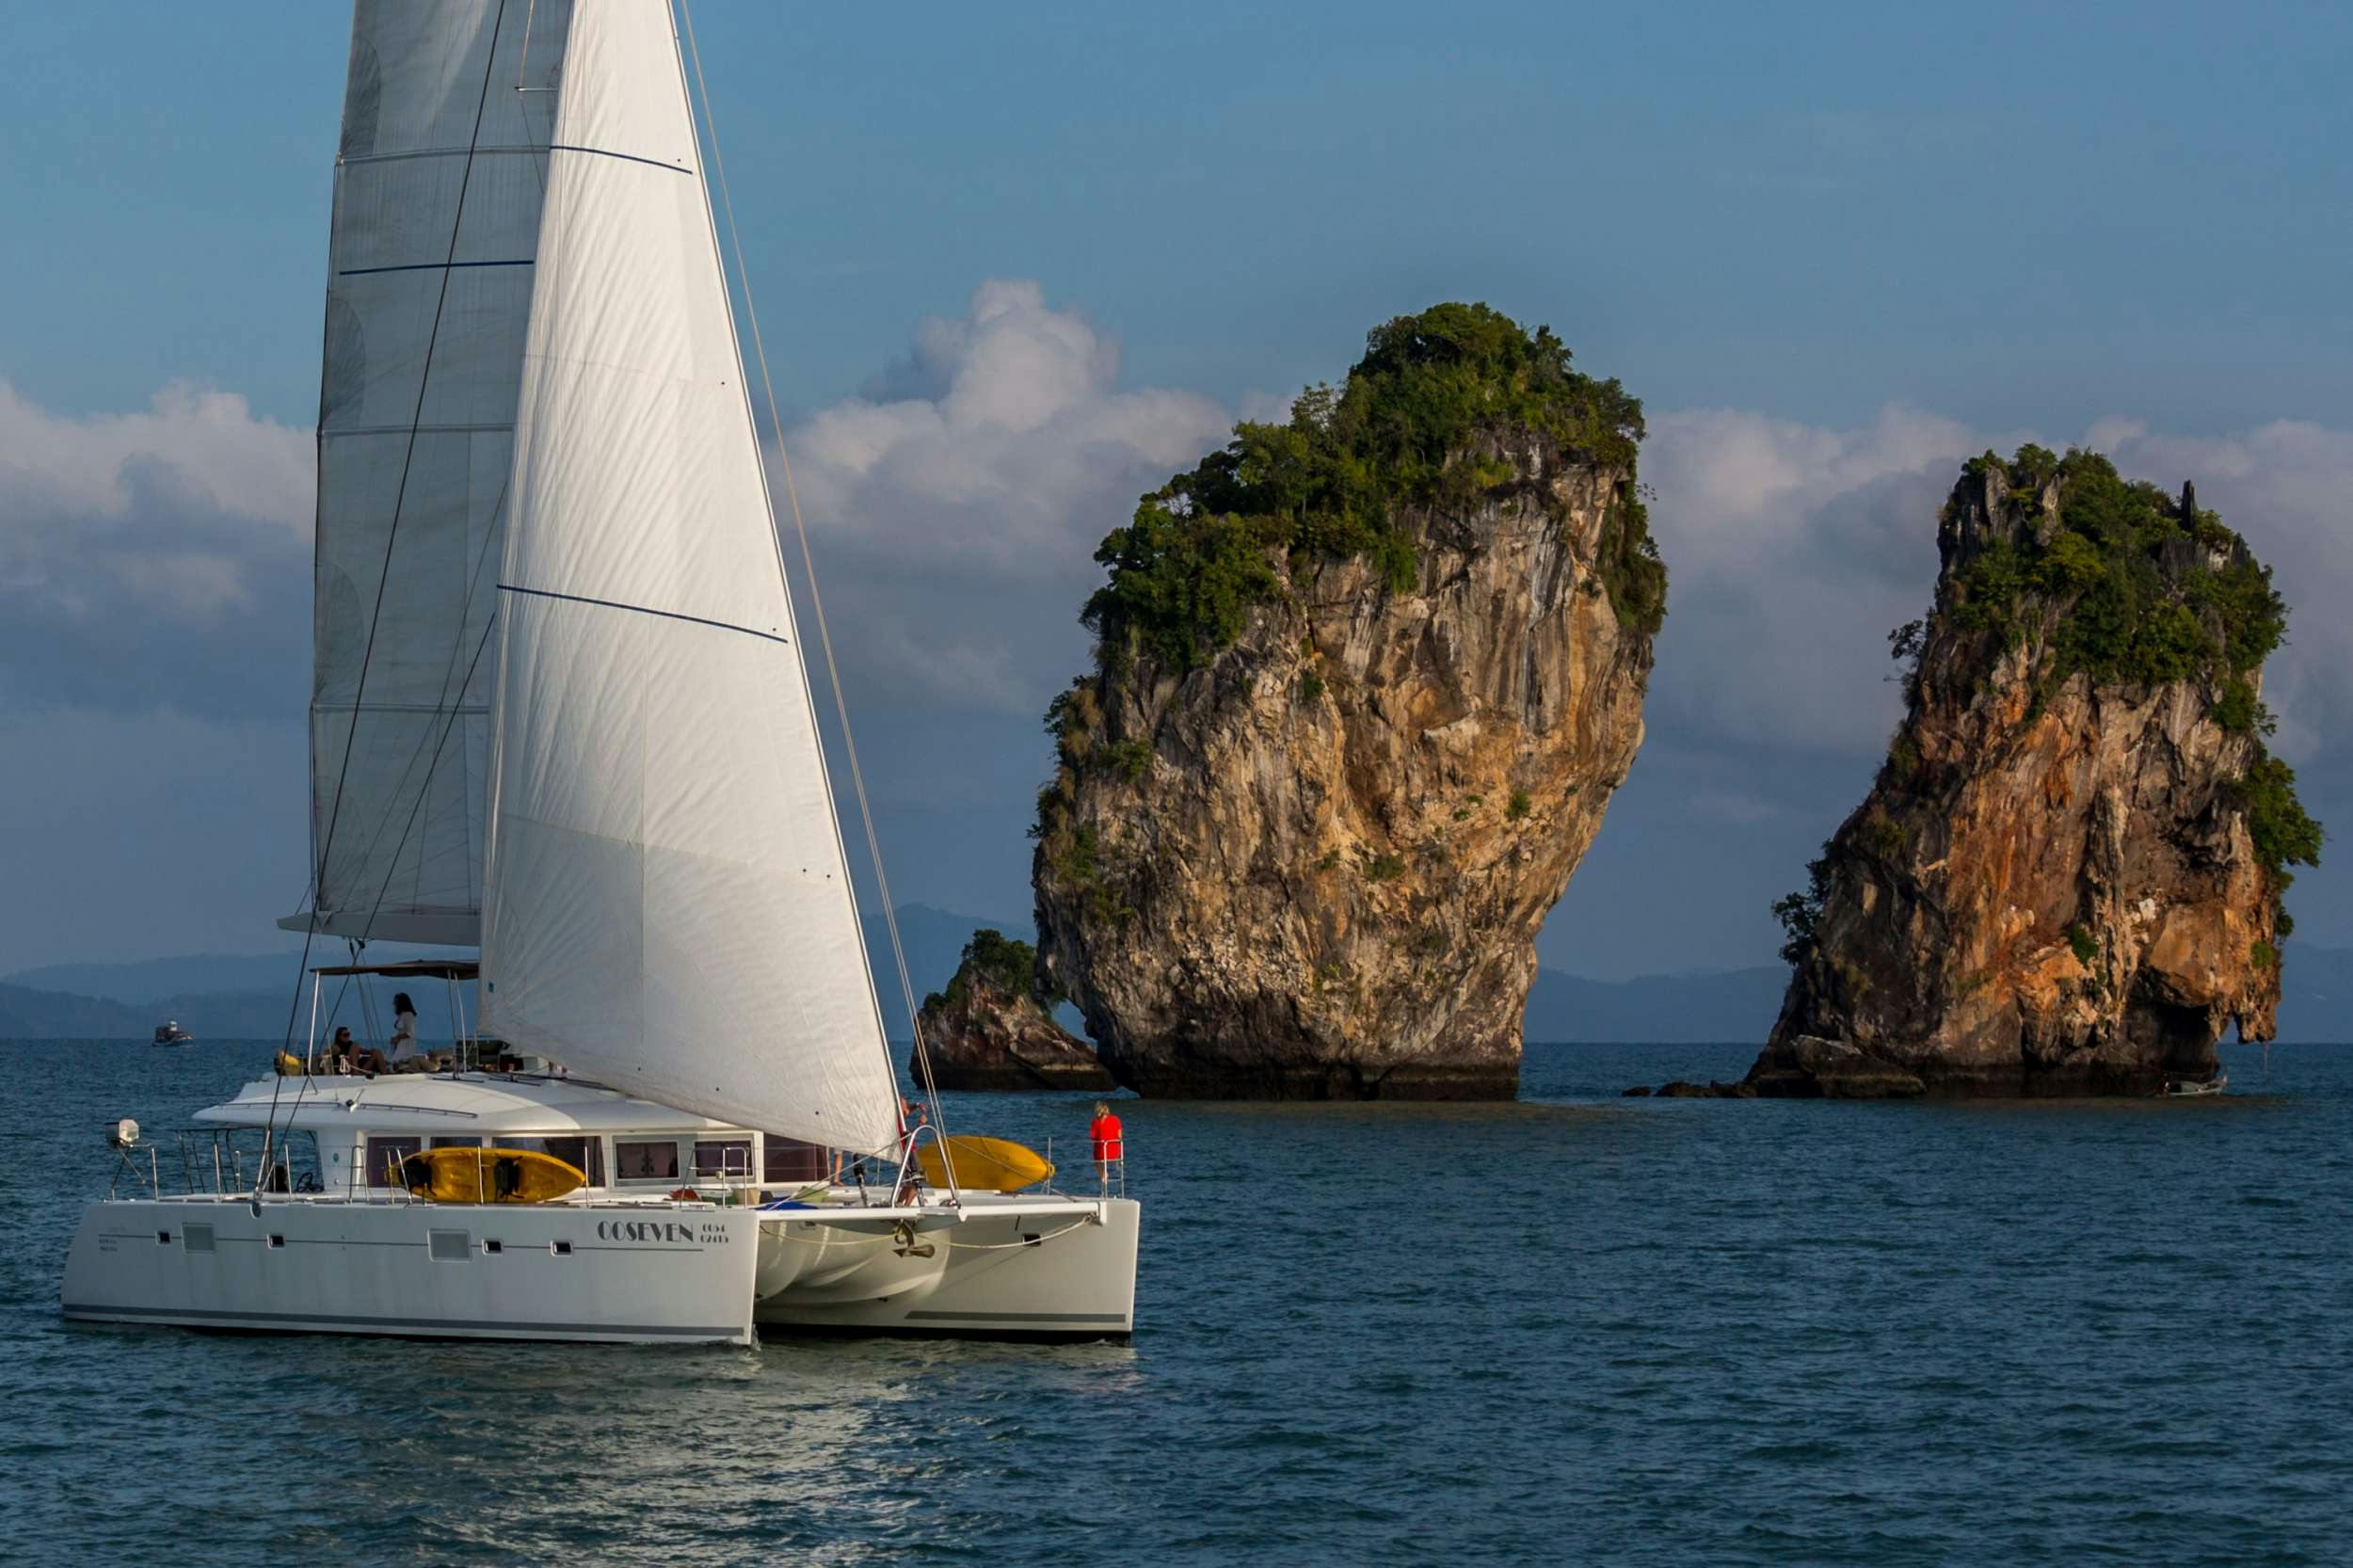 00SEVEN - Yacht Charter Phuket & Boat hire in SE Asia 1